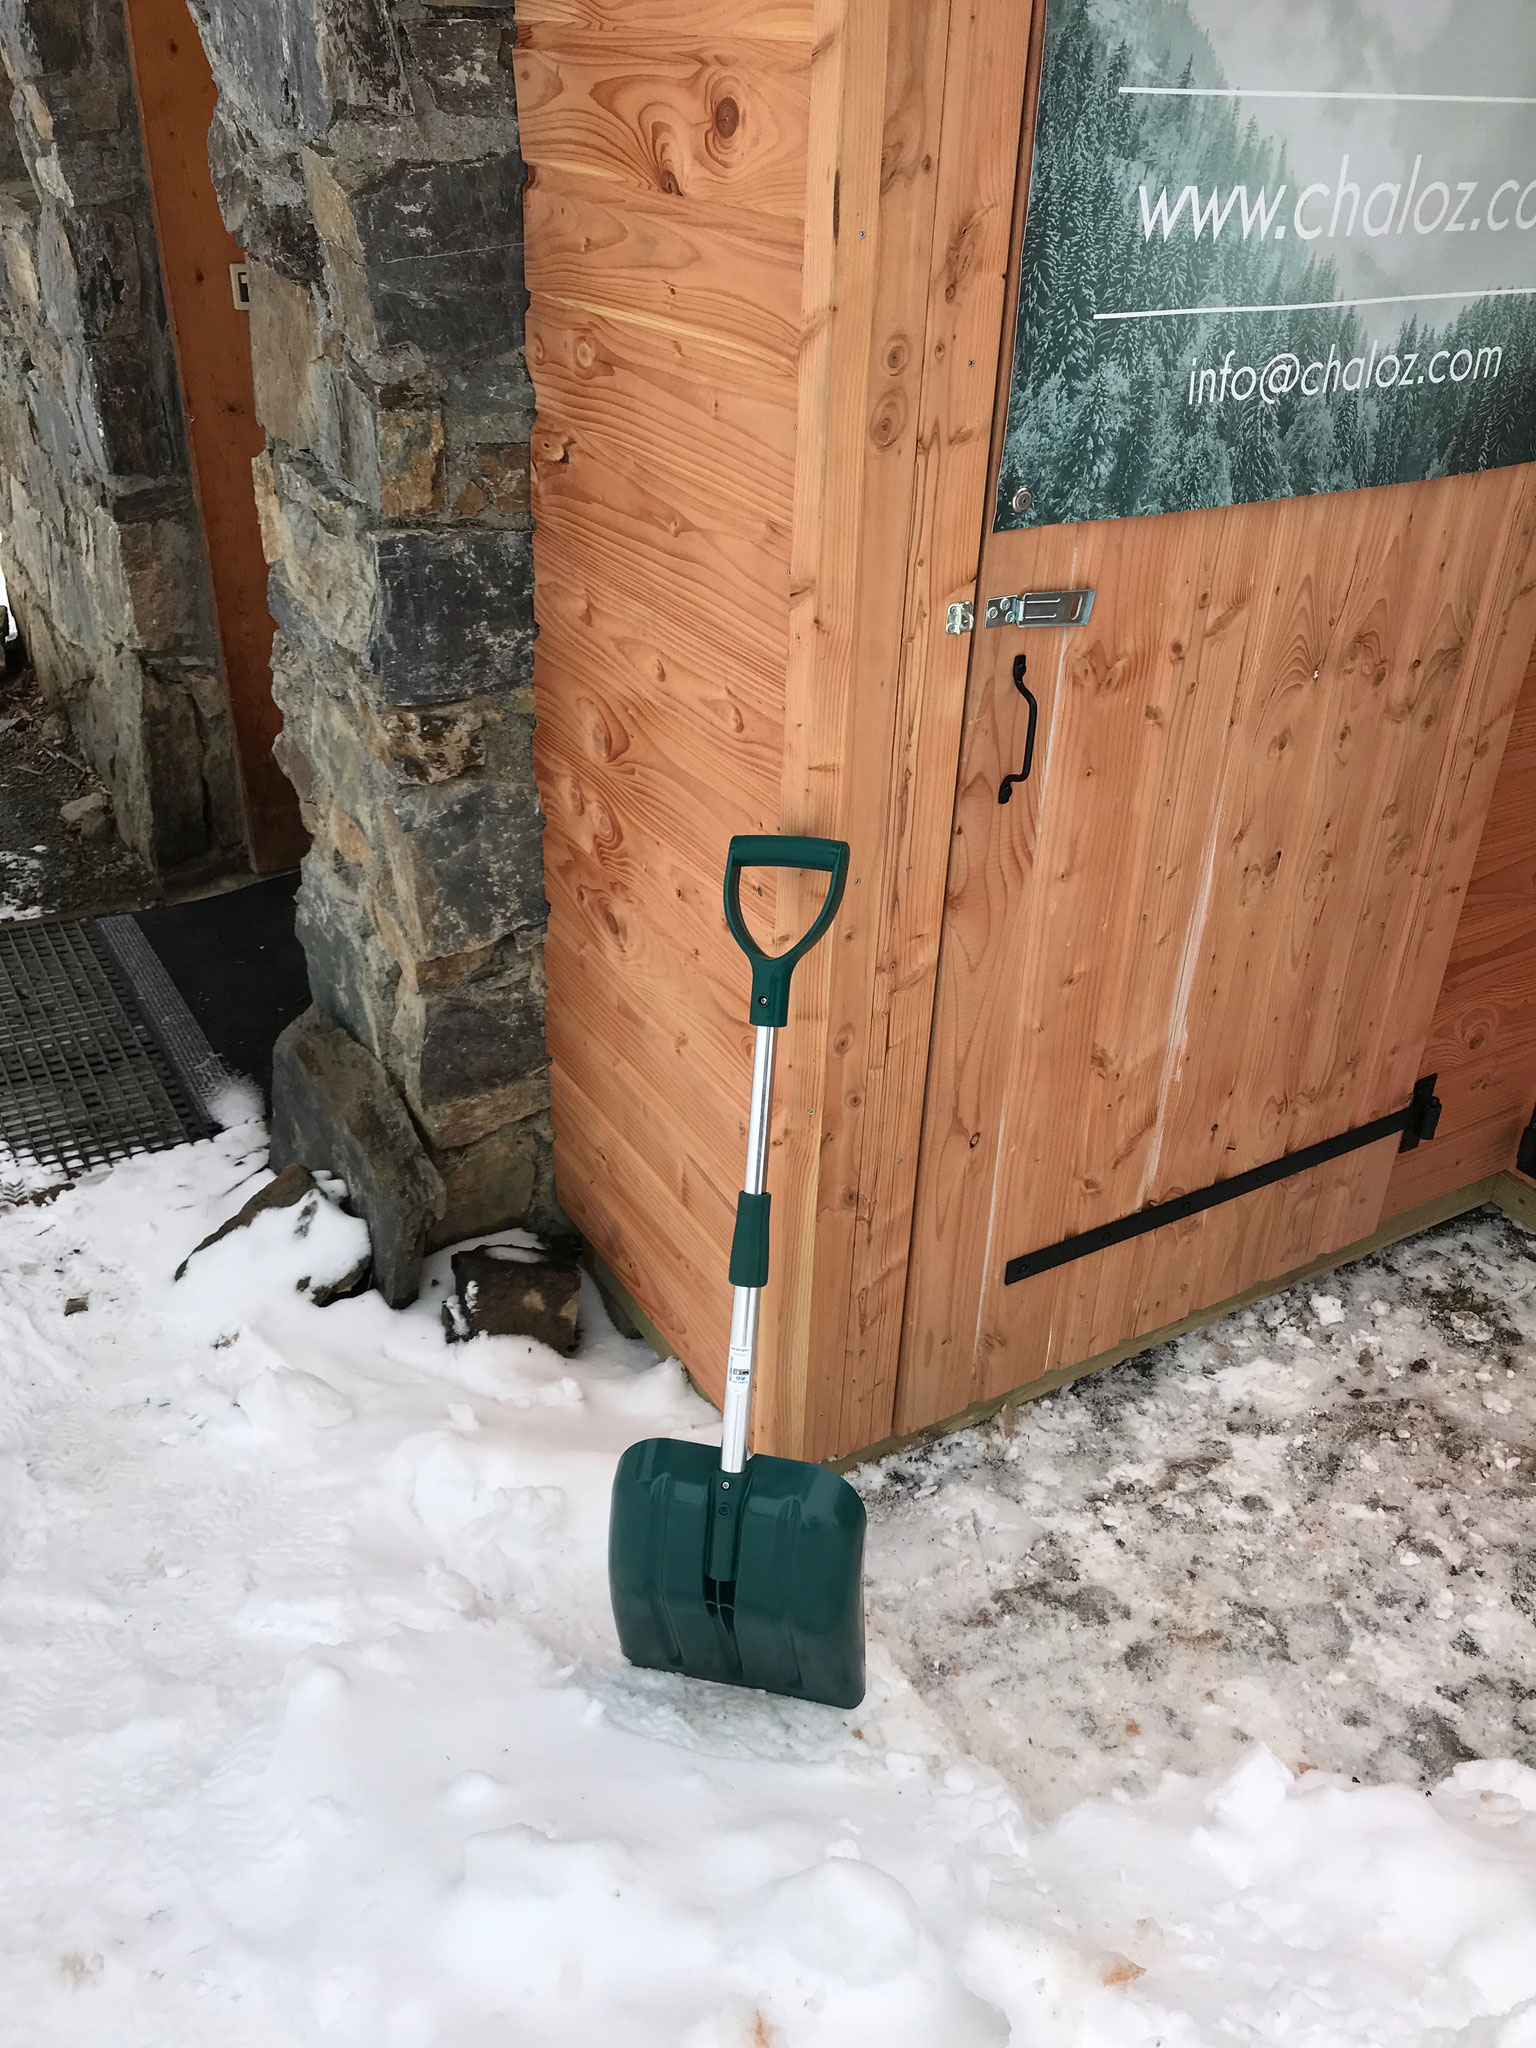 Small snow shovel inside the chalet,  if the cupboard is not accessible by snow and you need to clear the access first